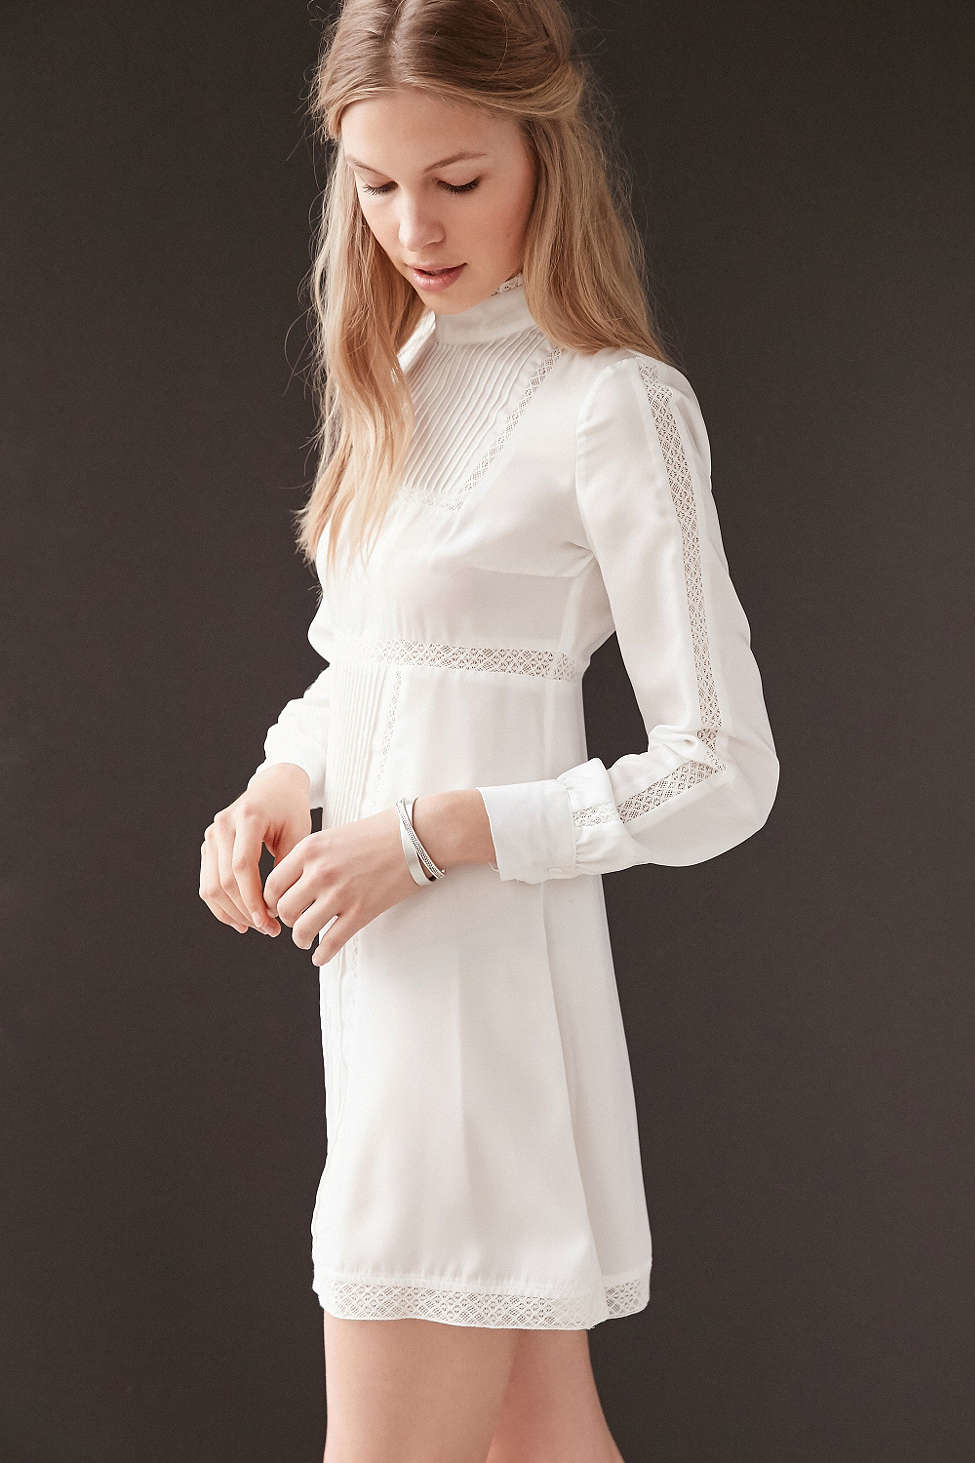 Download Lyst - Alice & Uo Gina Victorian Mock-neck Dress in White